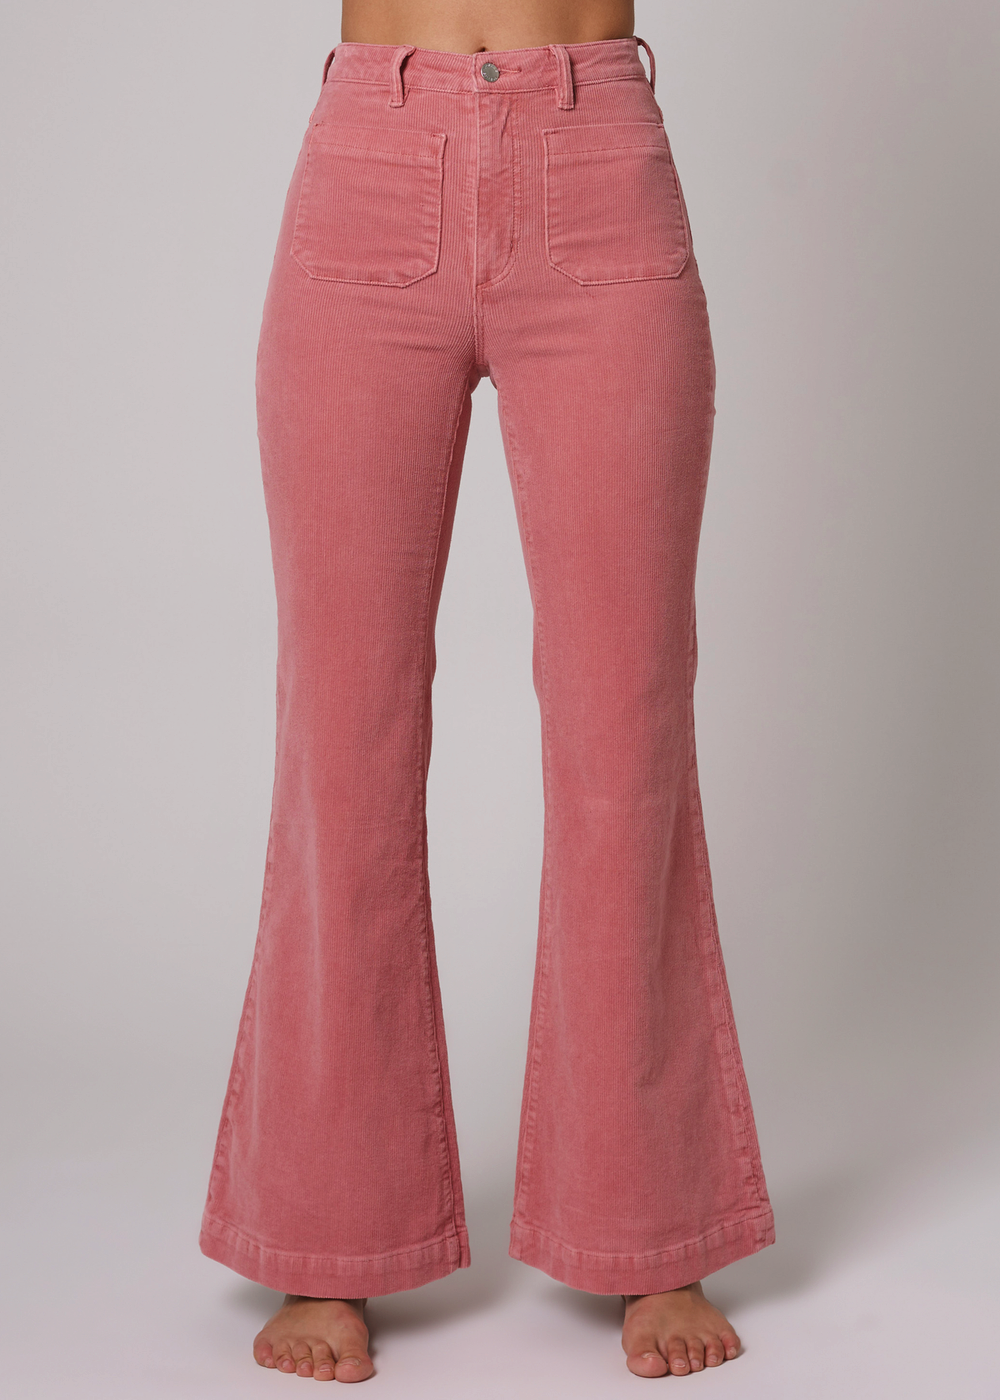 Retro 70s inspired Rolla's Eastcoast Corduroy Flare Bell Bottoms with Sailor Patch Pockets. Rose pink colorway. 